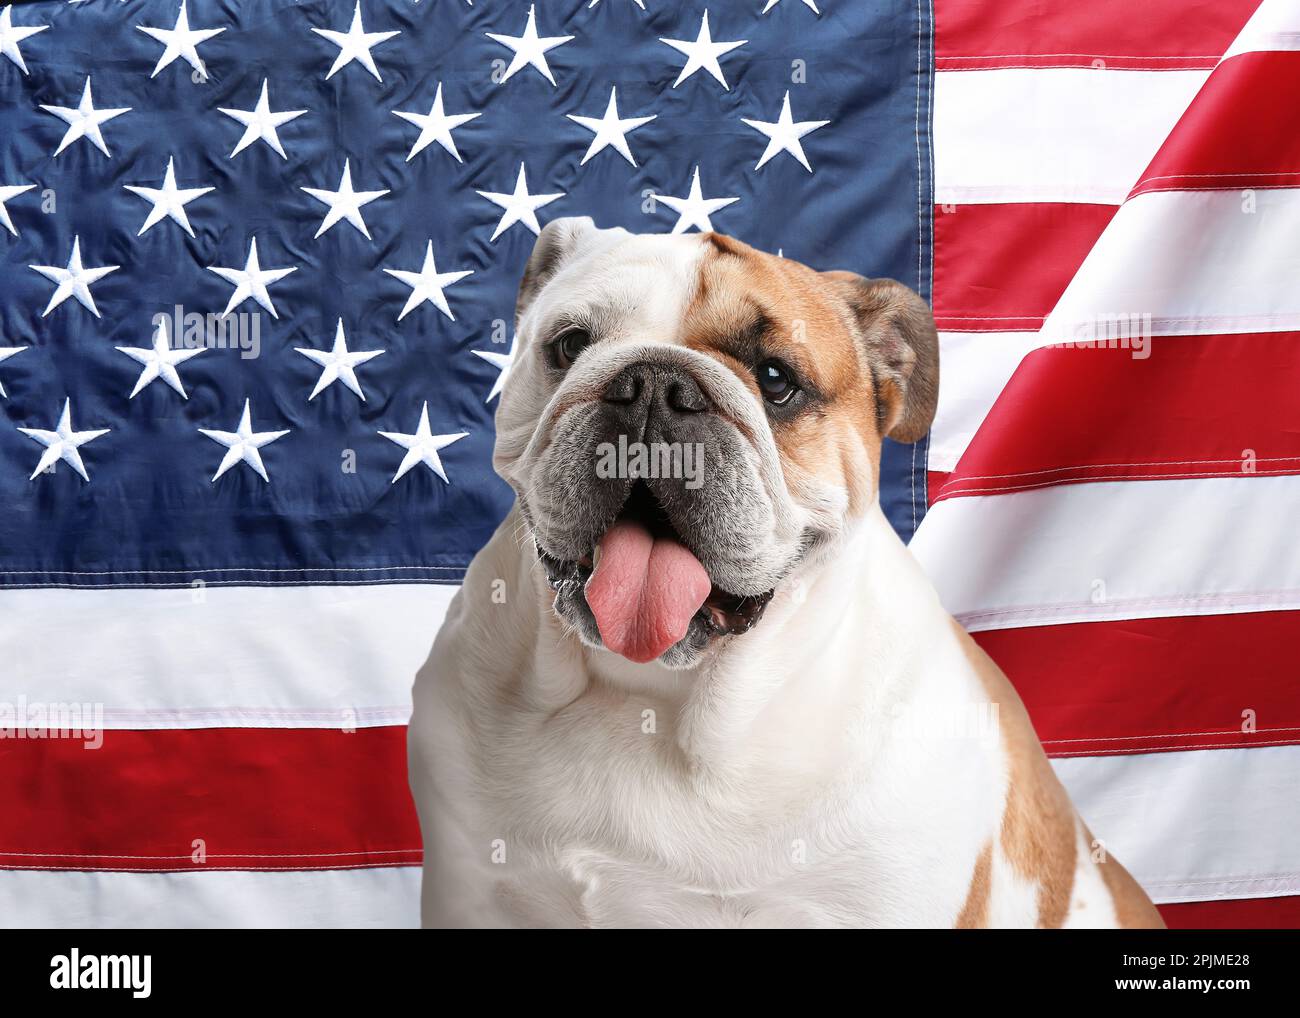 Adorable dog against national flag of United States of America Stock Photo